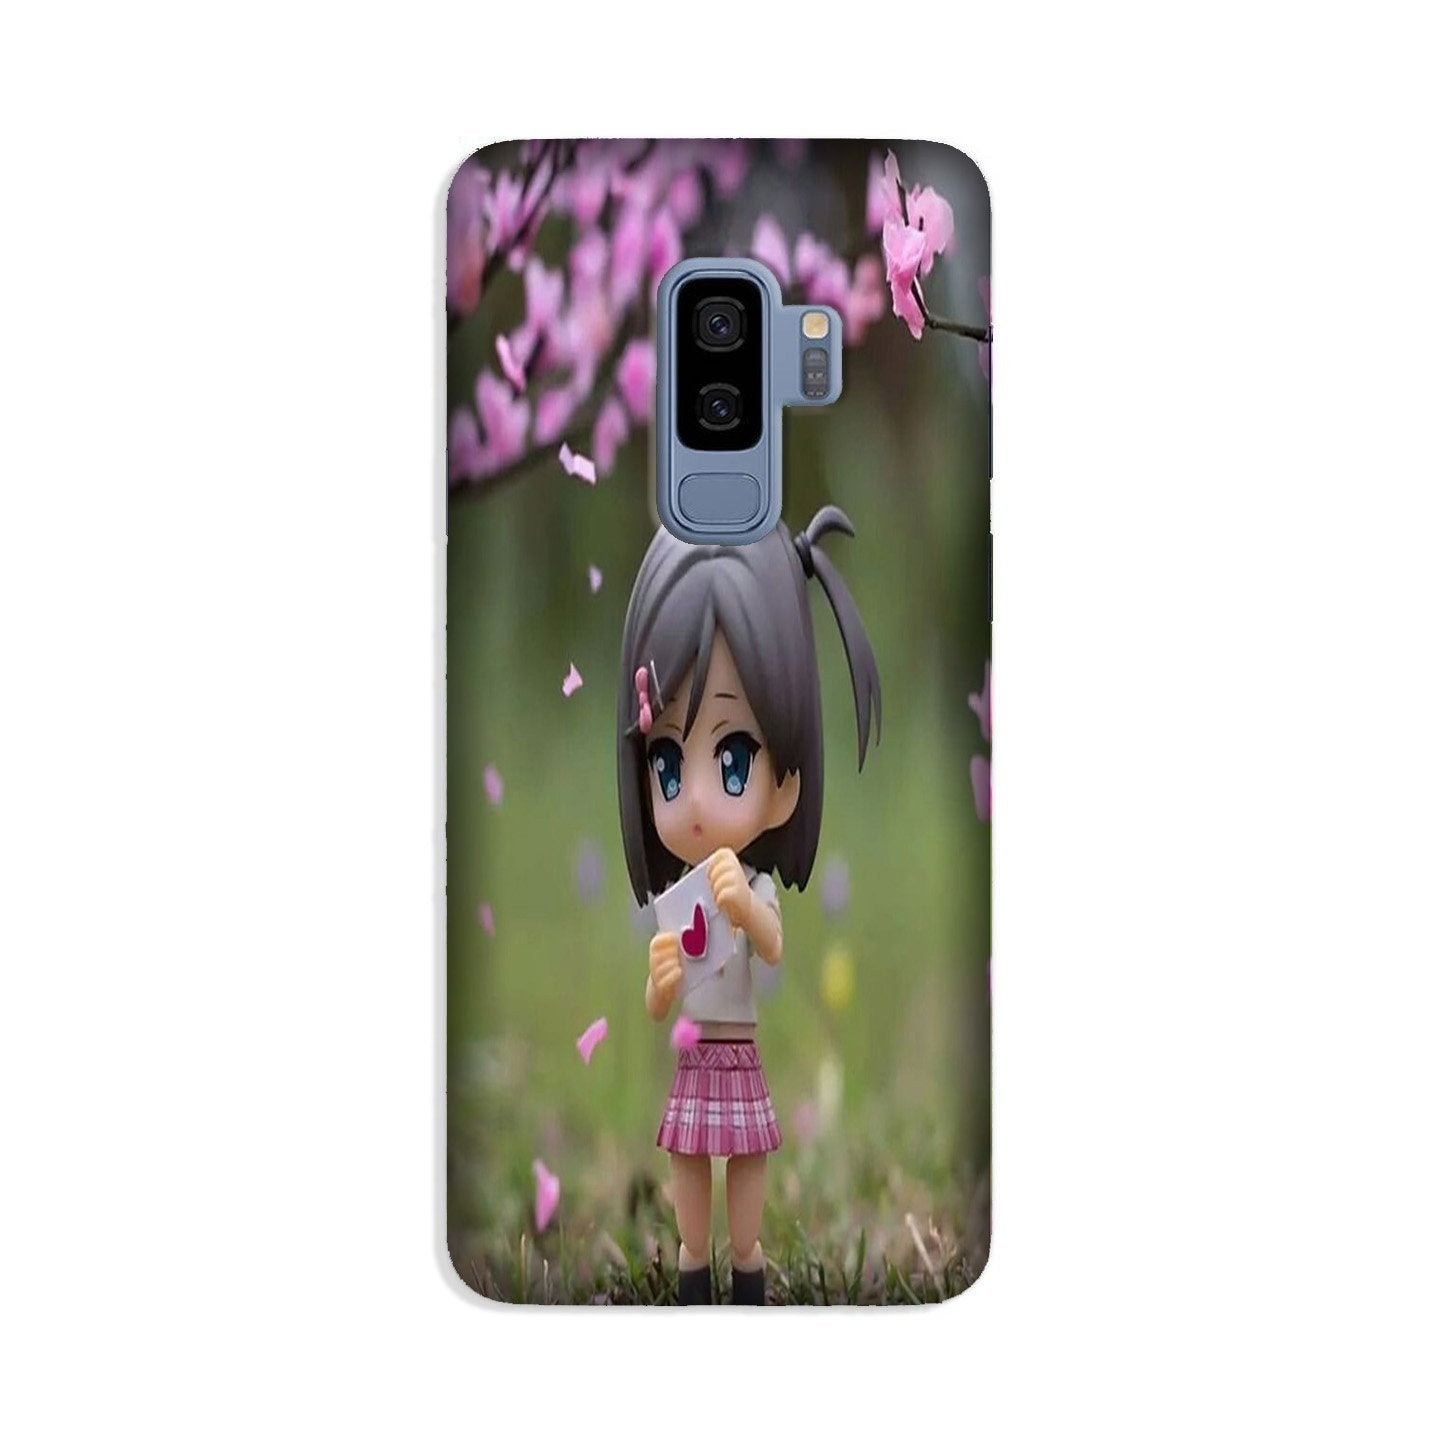 Cute Girl Case for Galaxy S9 Plus